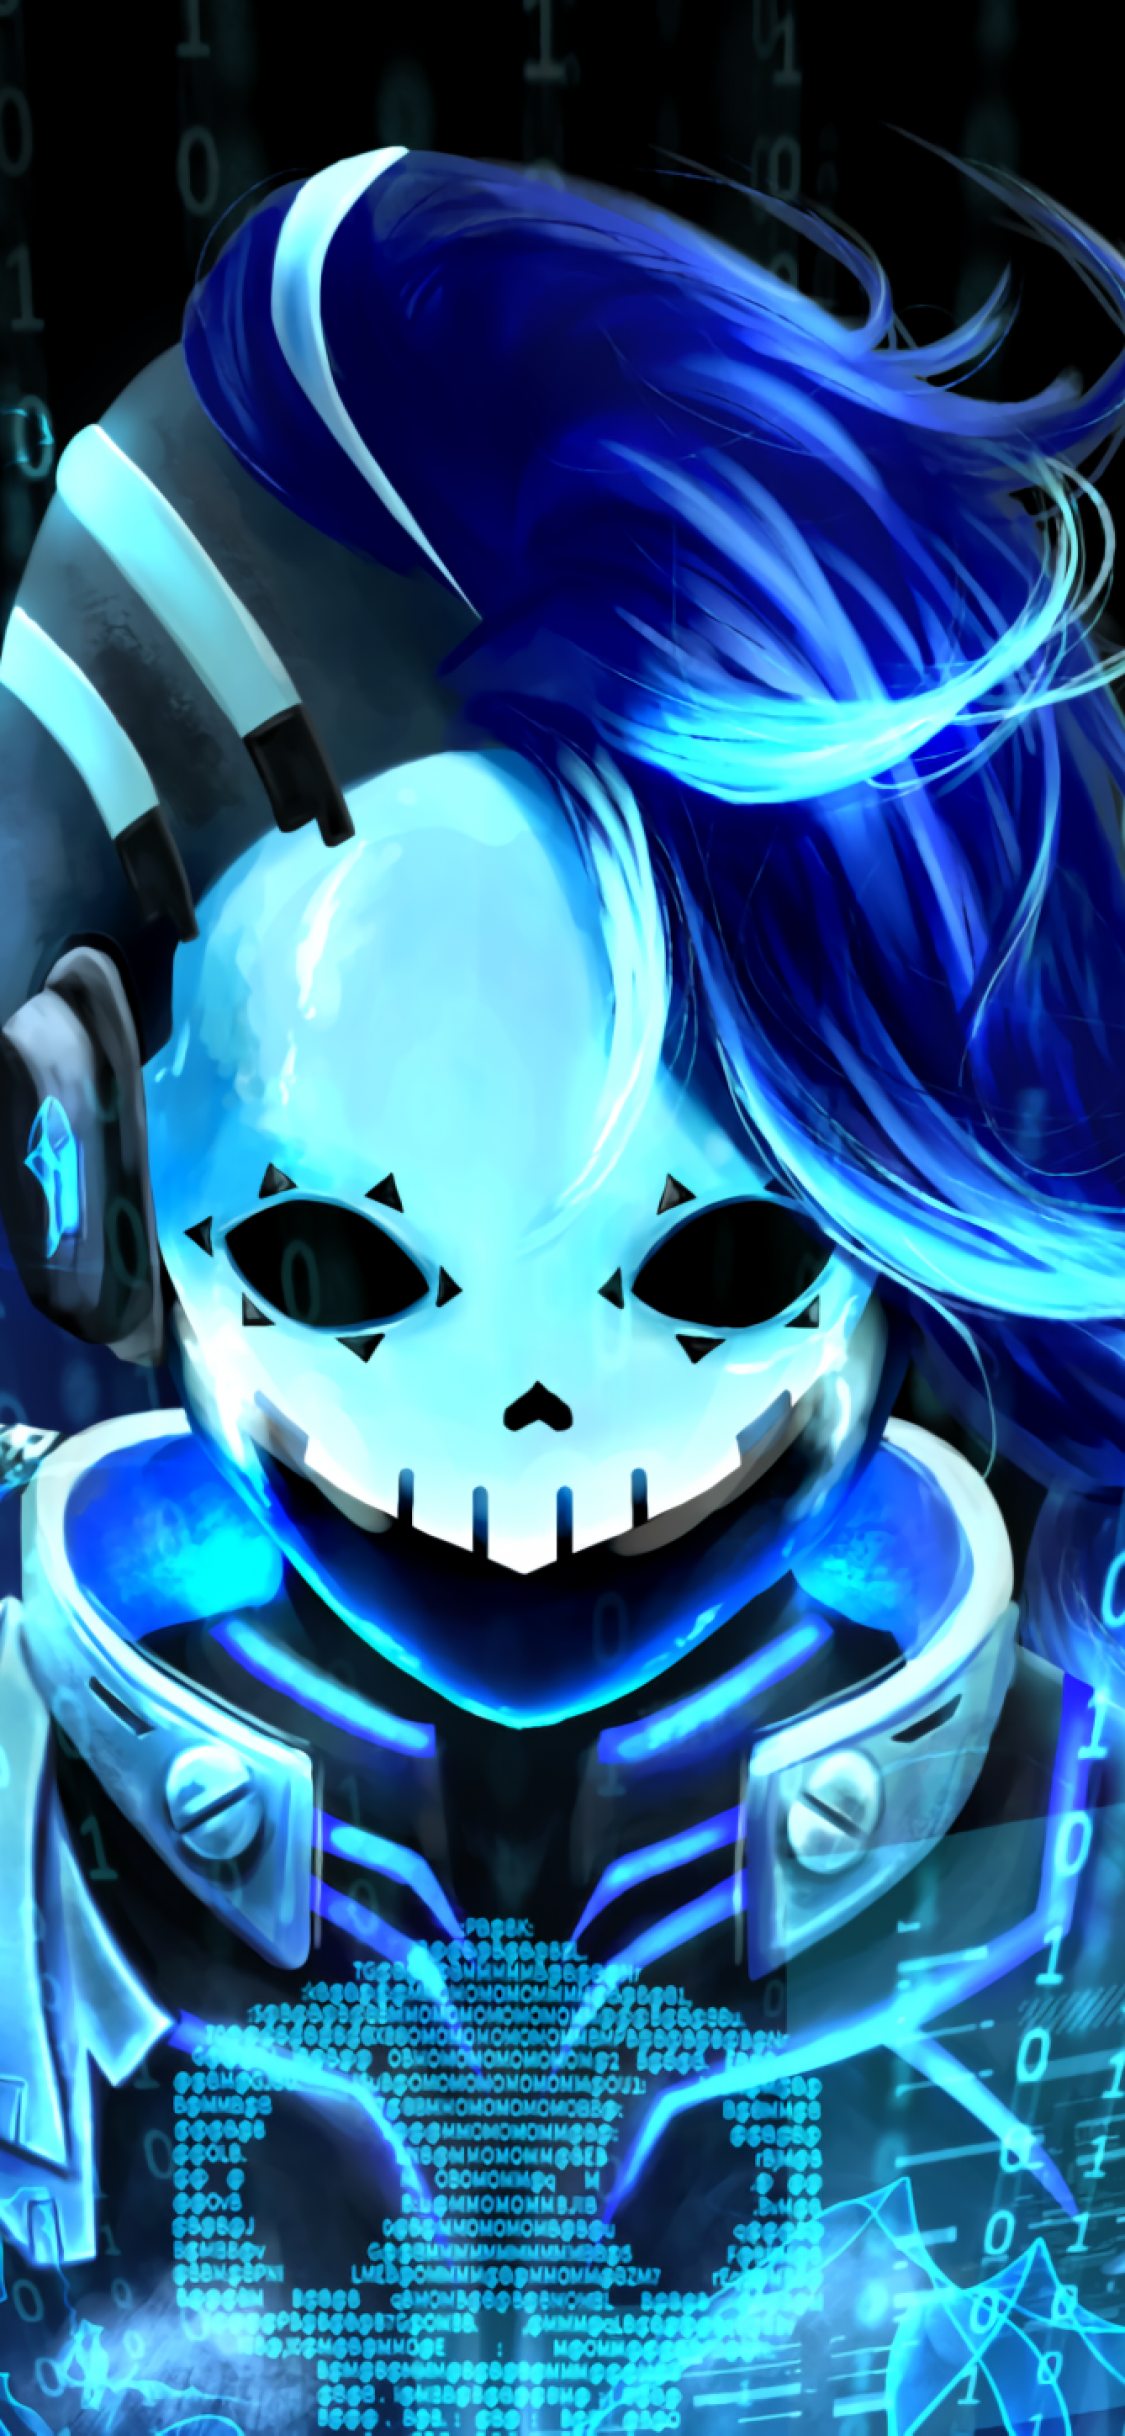 overwatch iphone wallpaper,fictional character,animation,graphic design,cg artwork,skull